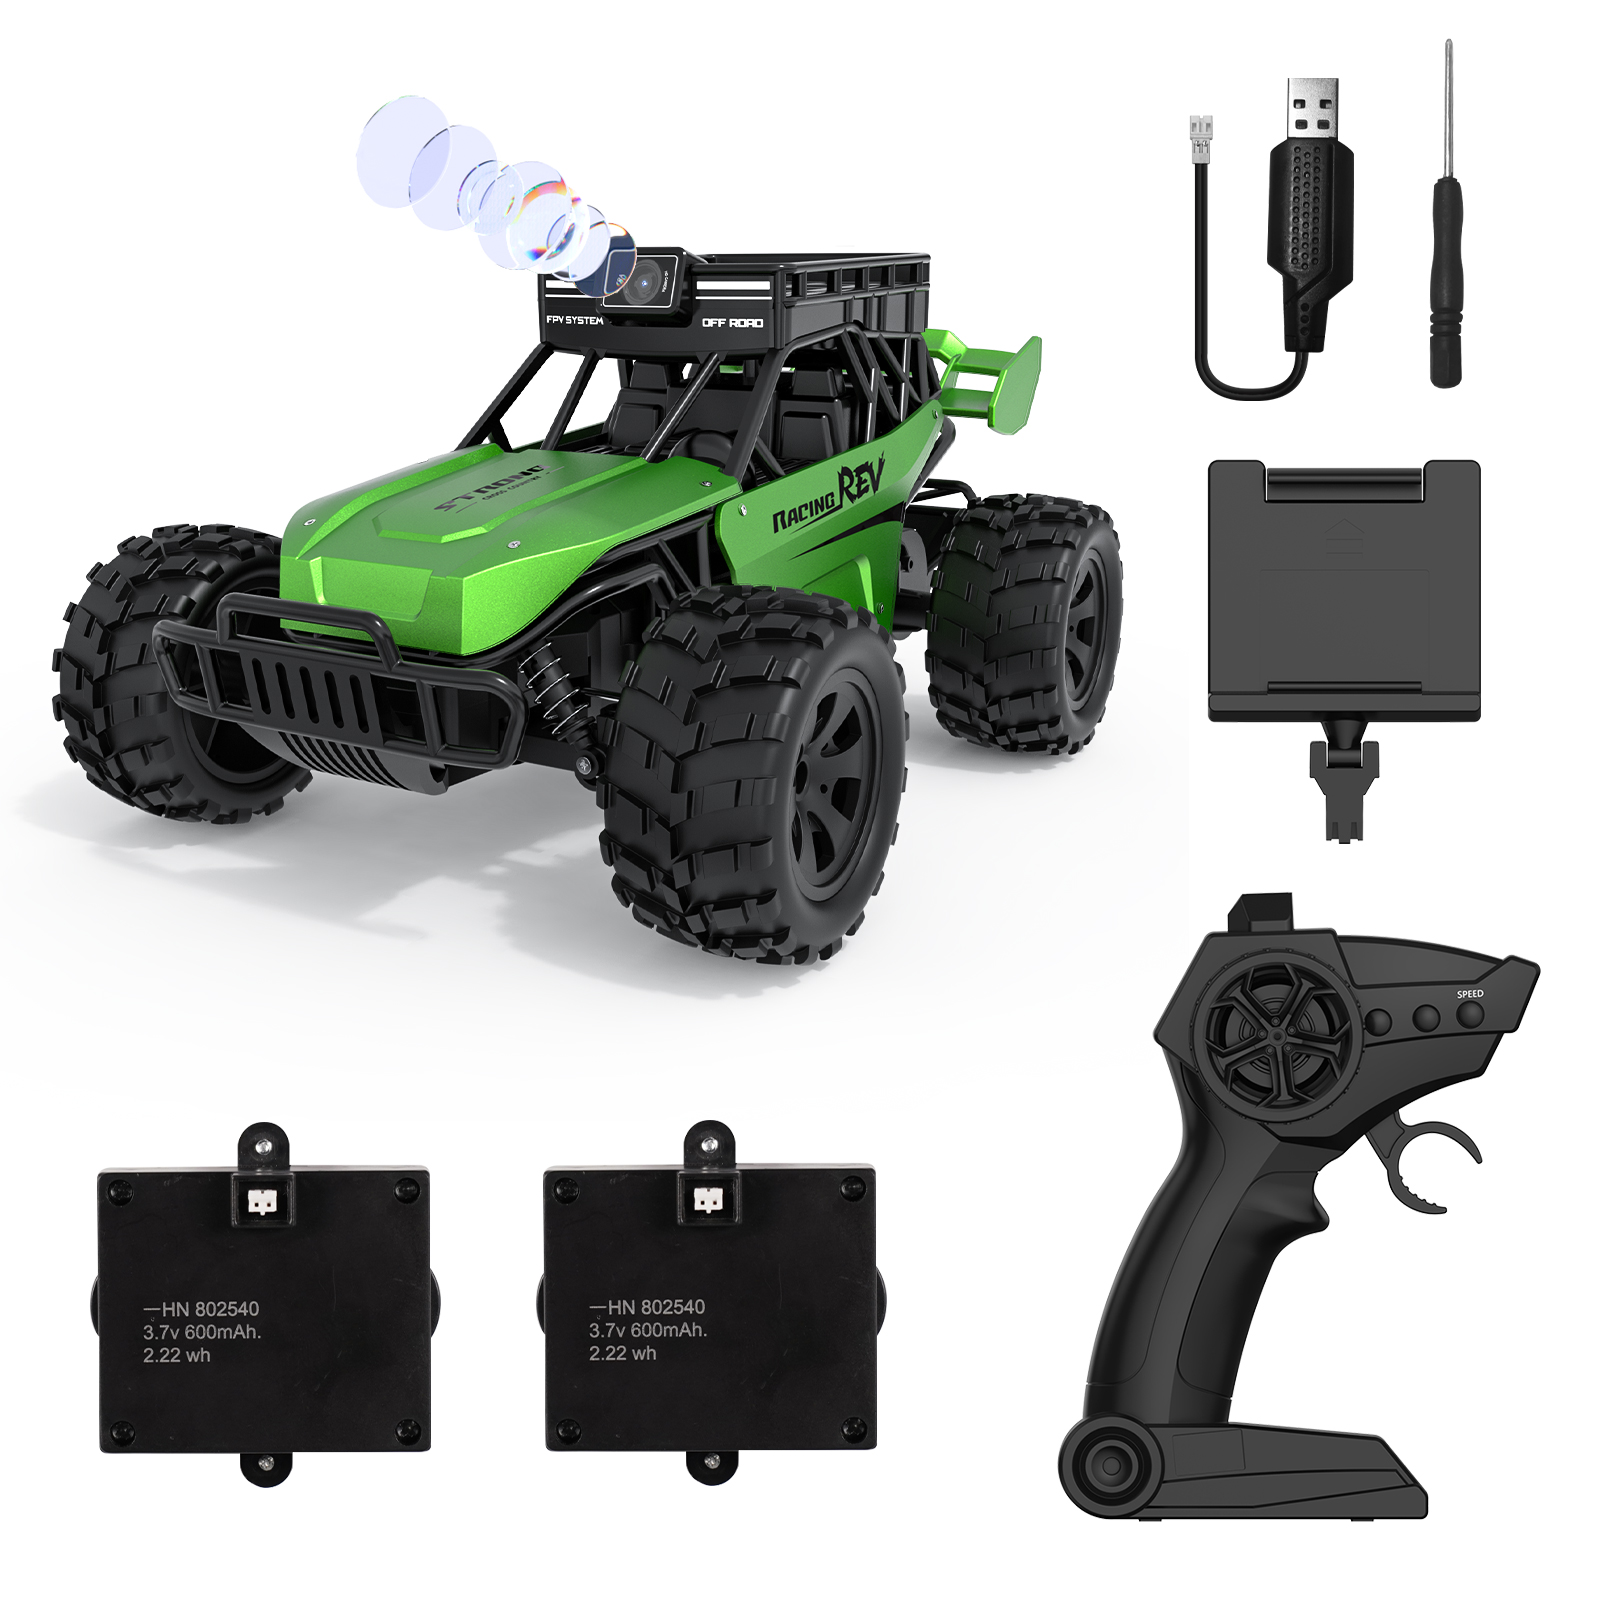 RC Car 1:18 Scale off-Road Remote Control Truck with Camera Toy Xmas Gifts for Kids Adults 2 Batteries Green - image 11 of 11